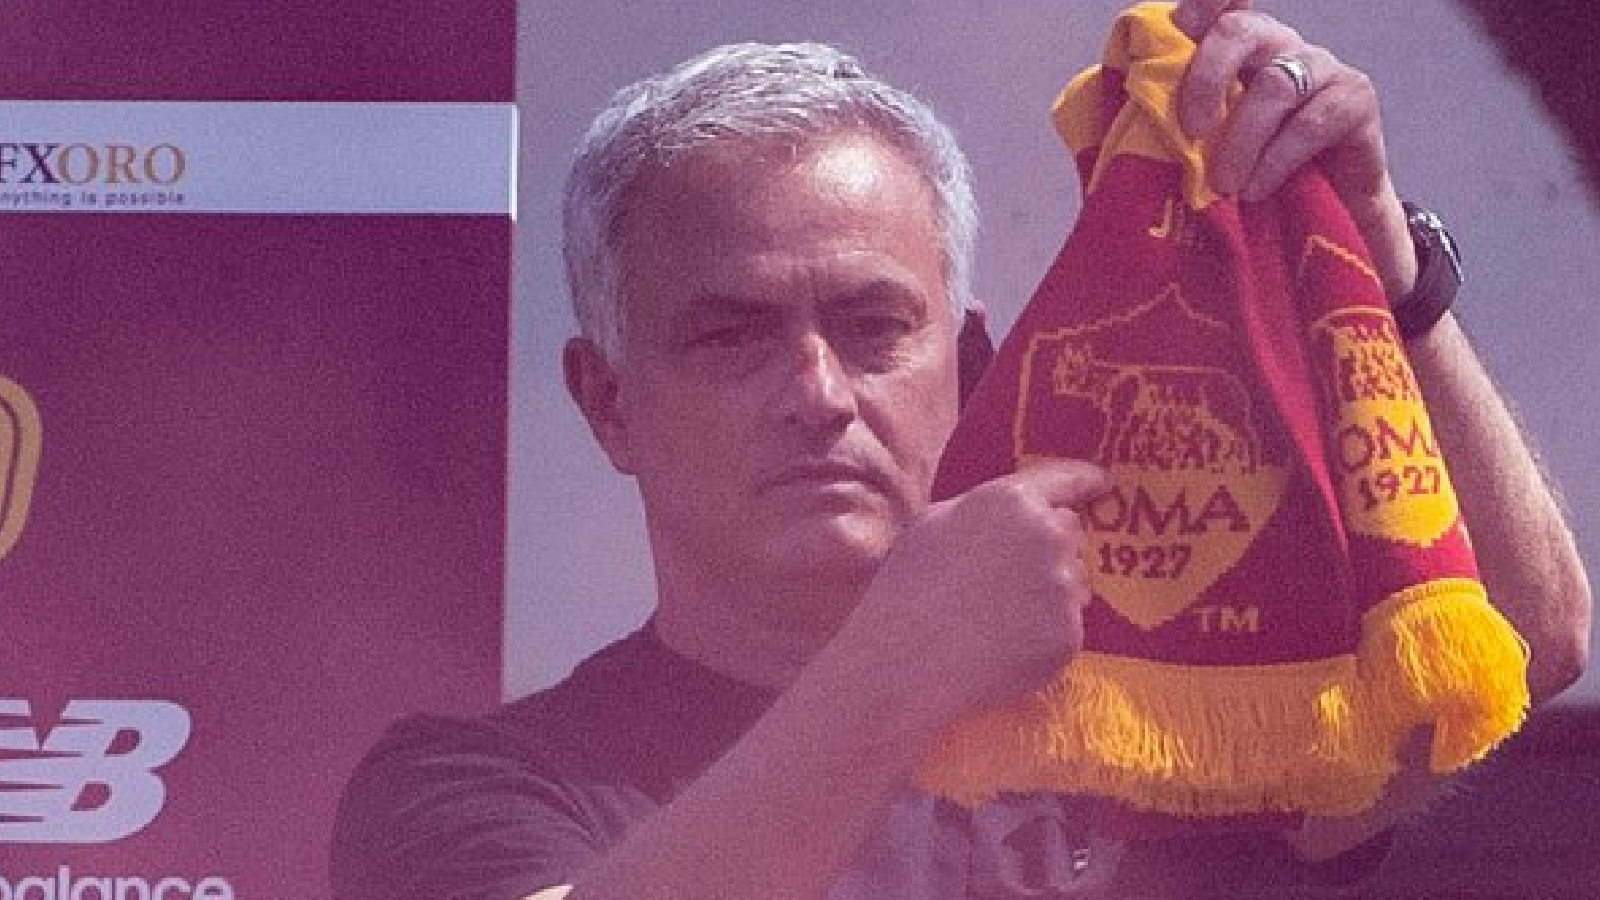 Watch: Jose Mourinho arrives to rousing reception in Rome